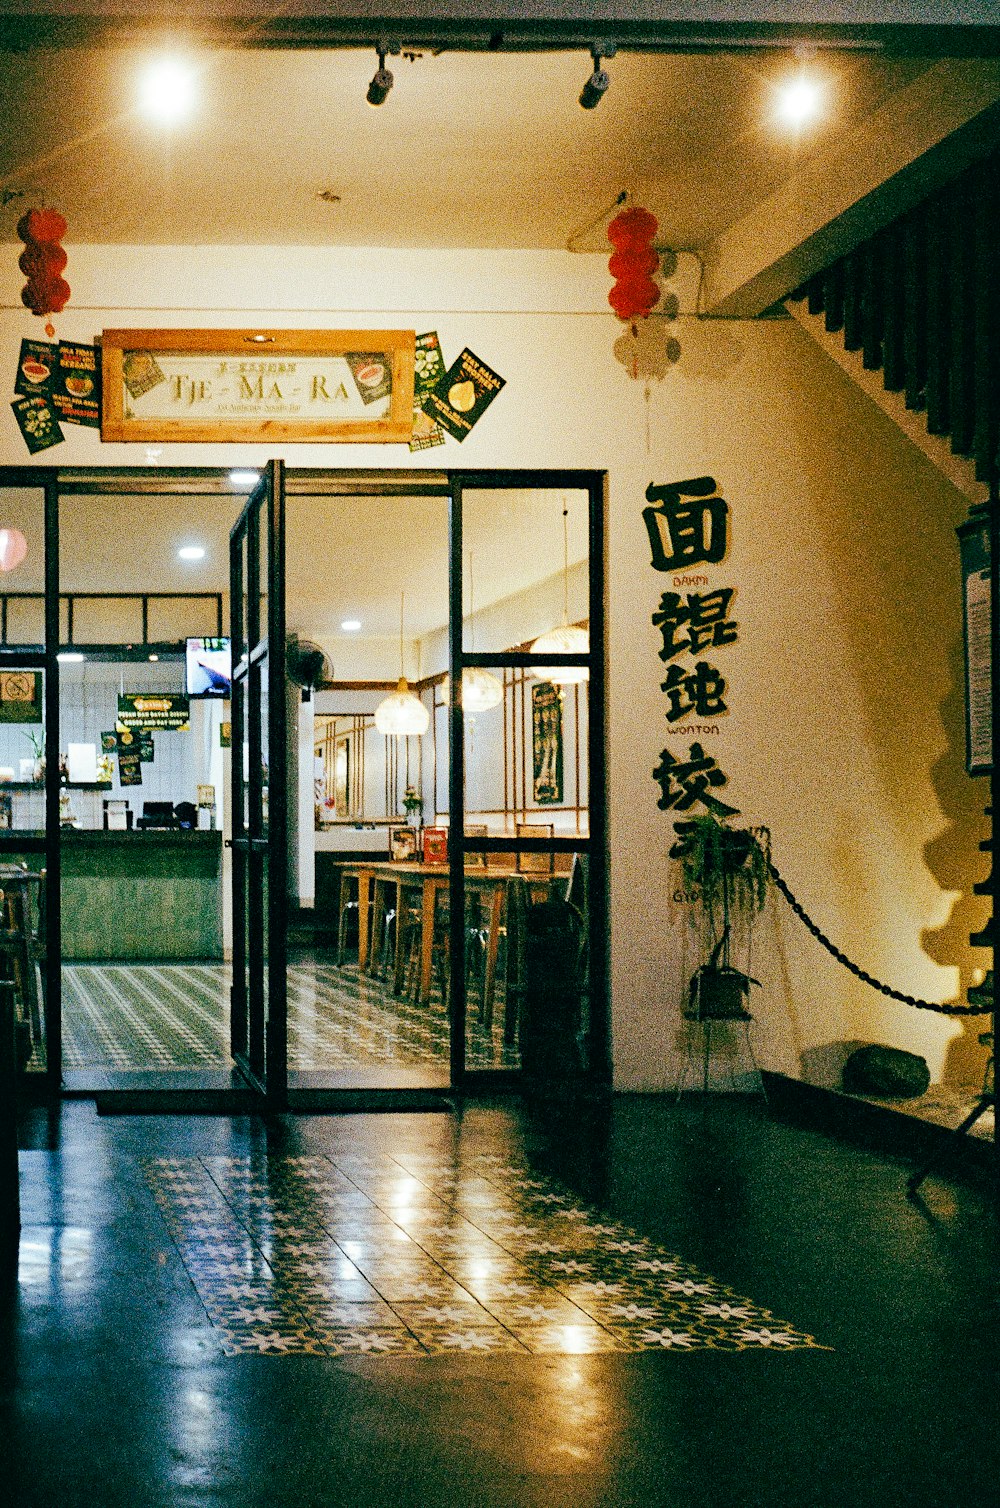 the entrance to a restaurant at night time